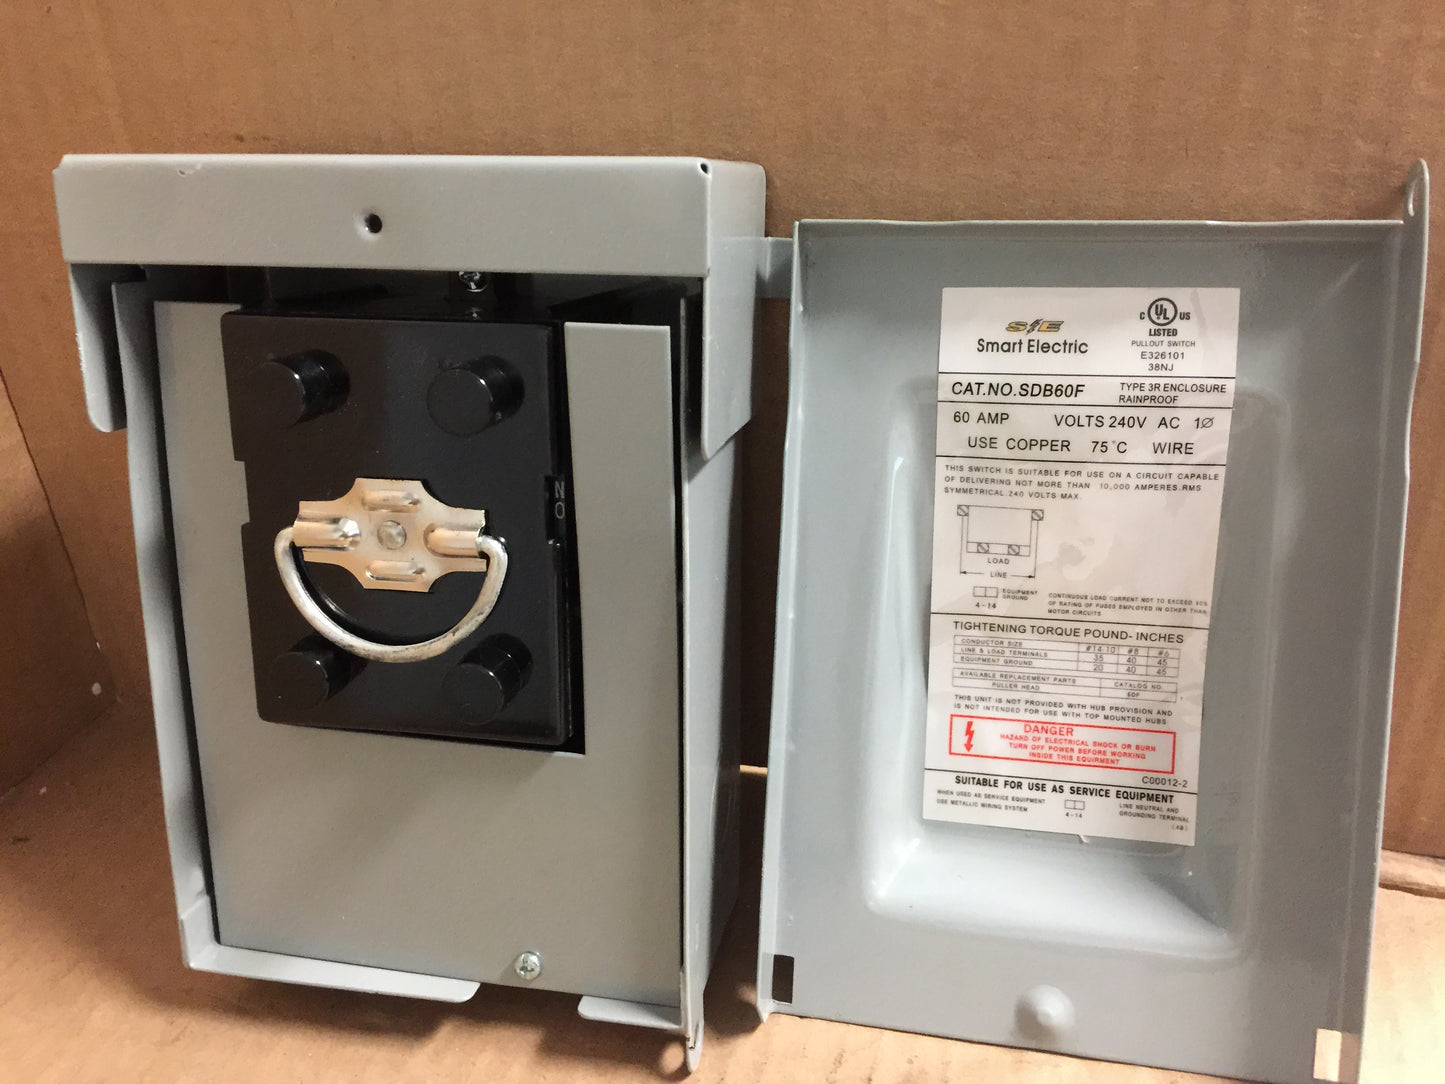 60 AMP FUSIBLE DISCONNECT